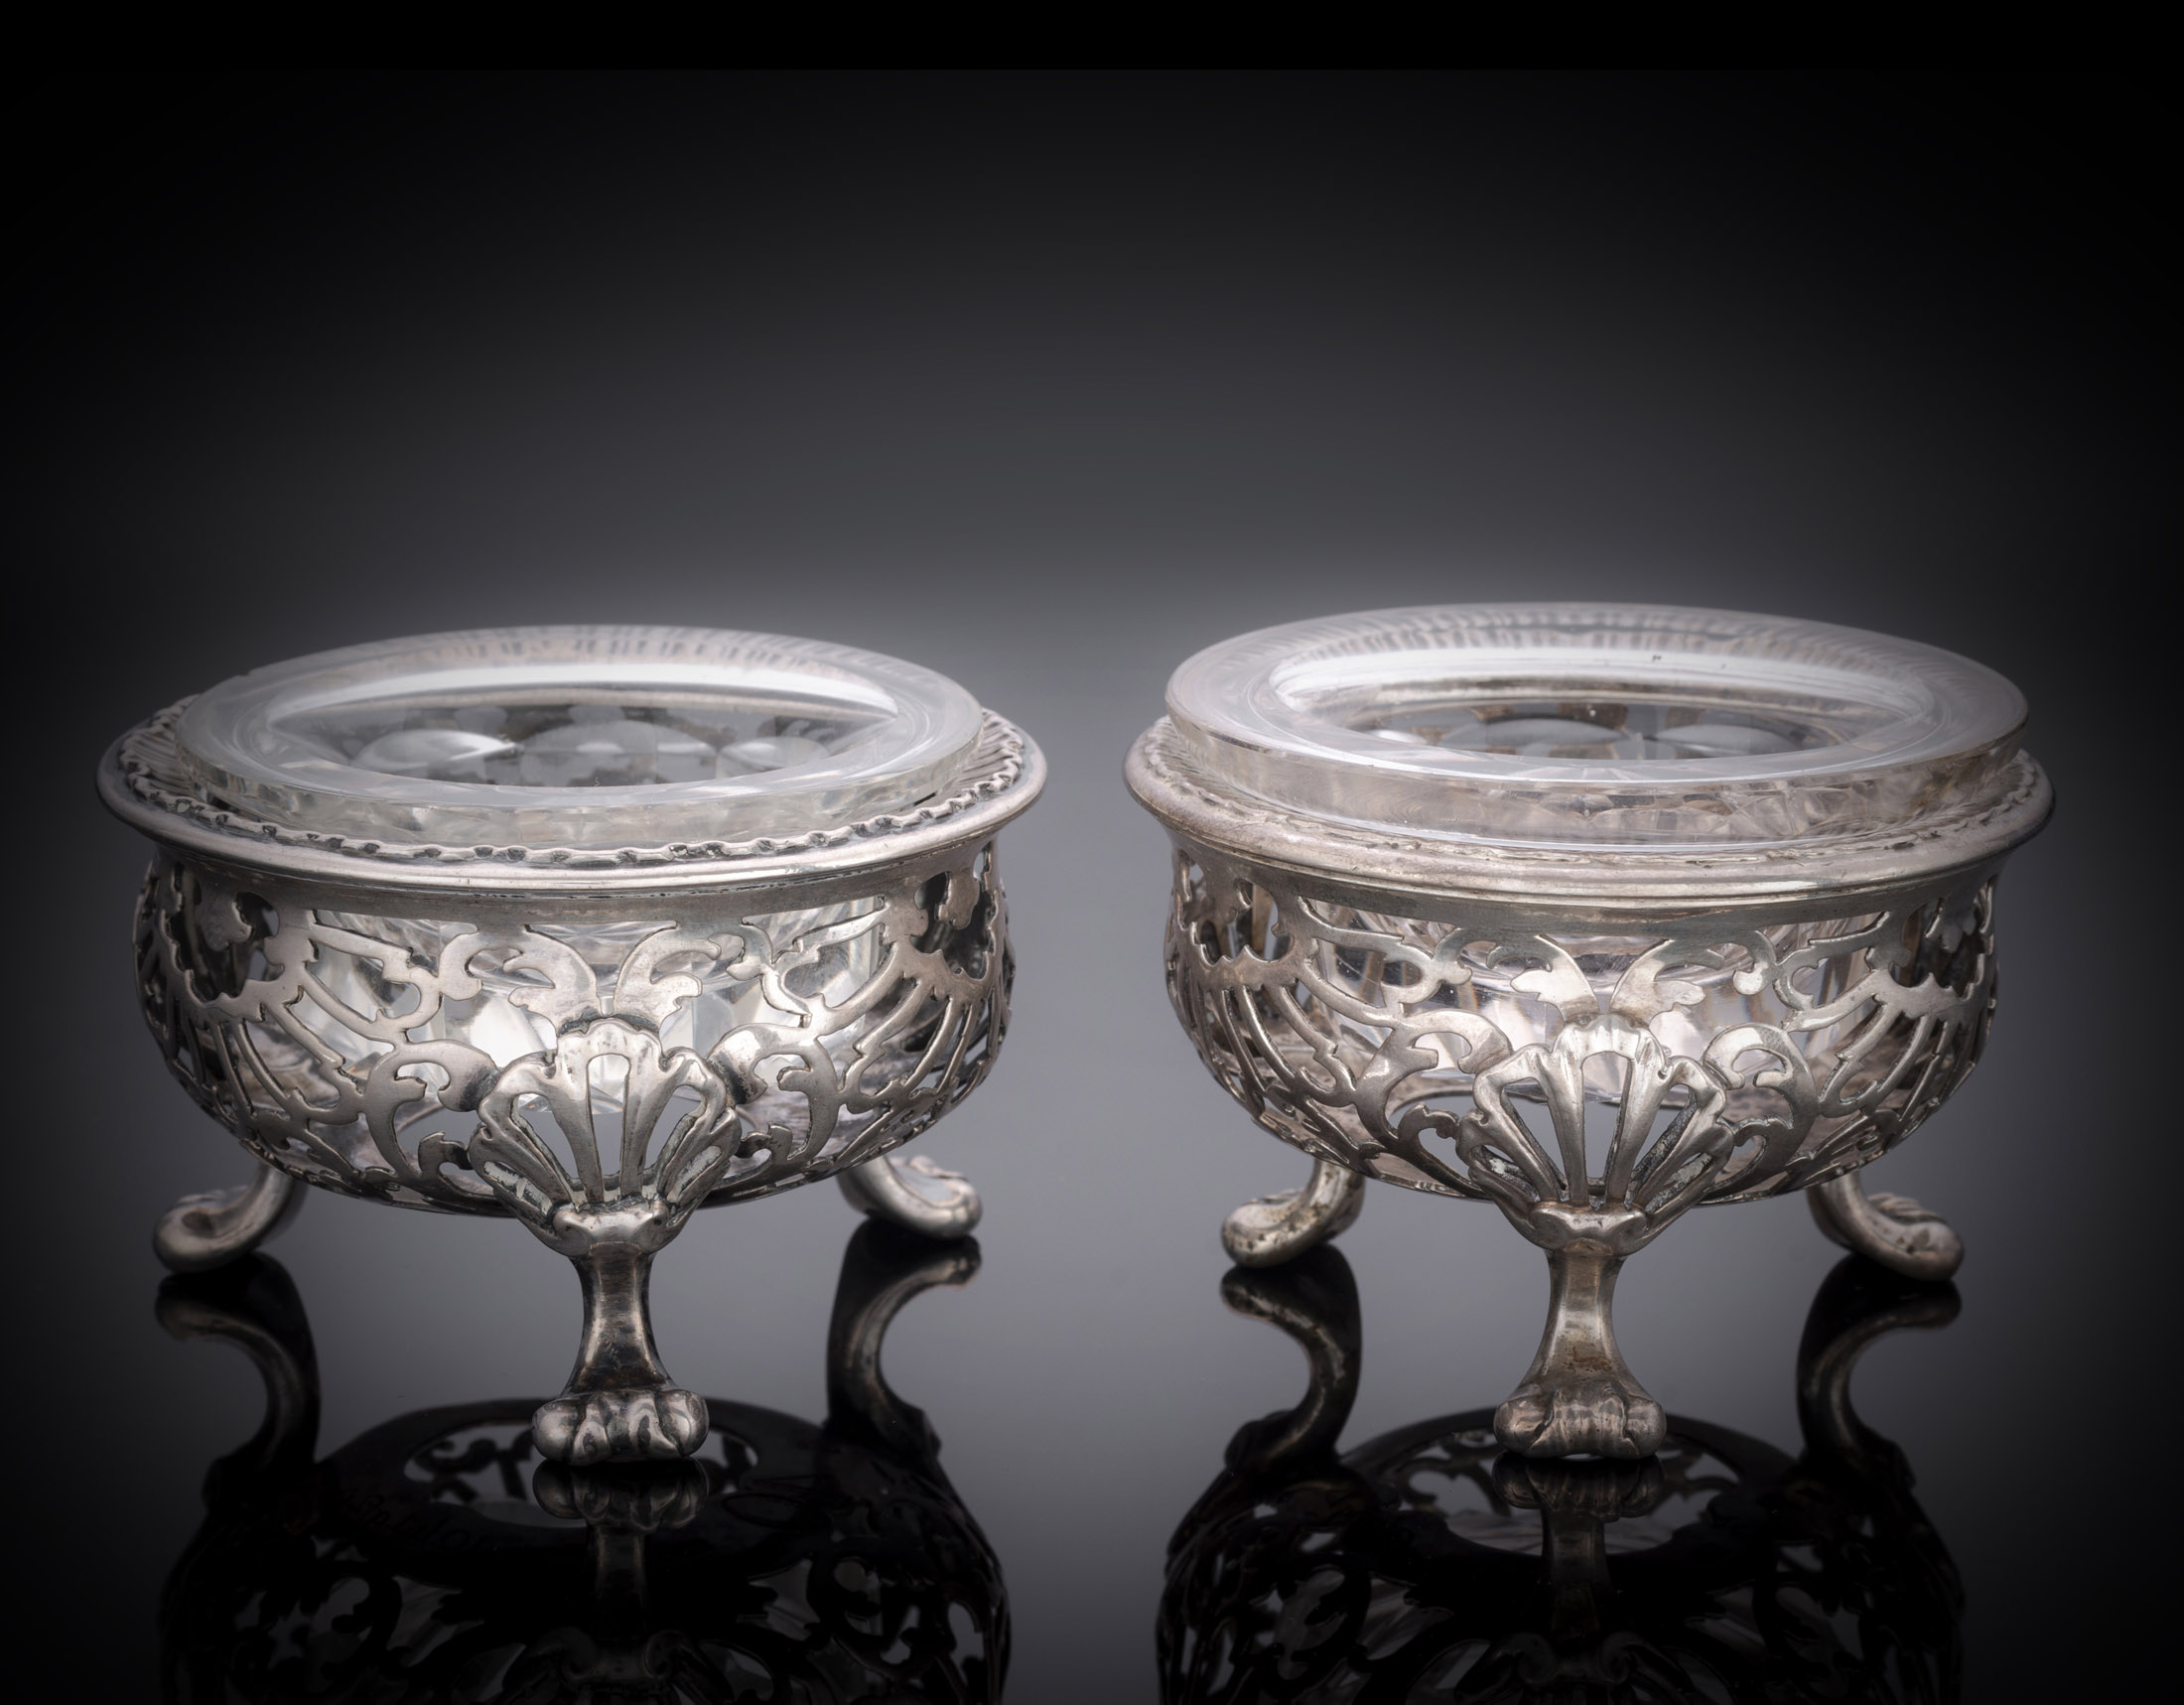 TWO GERMAN OPENWORK SILVER SALT CELLARS FROM THE TABLE SERVICE OF FREDERICK AUGUST III ELECTOR OF S